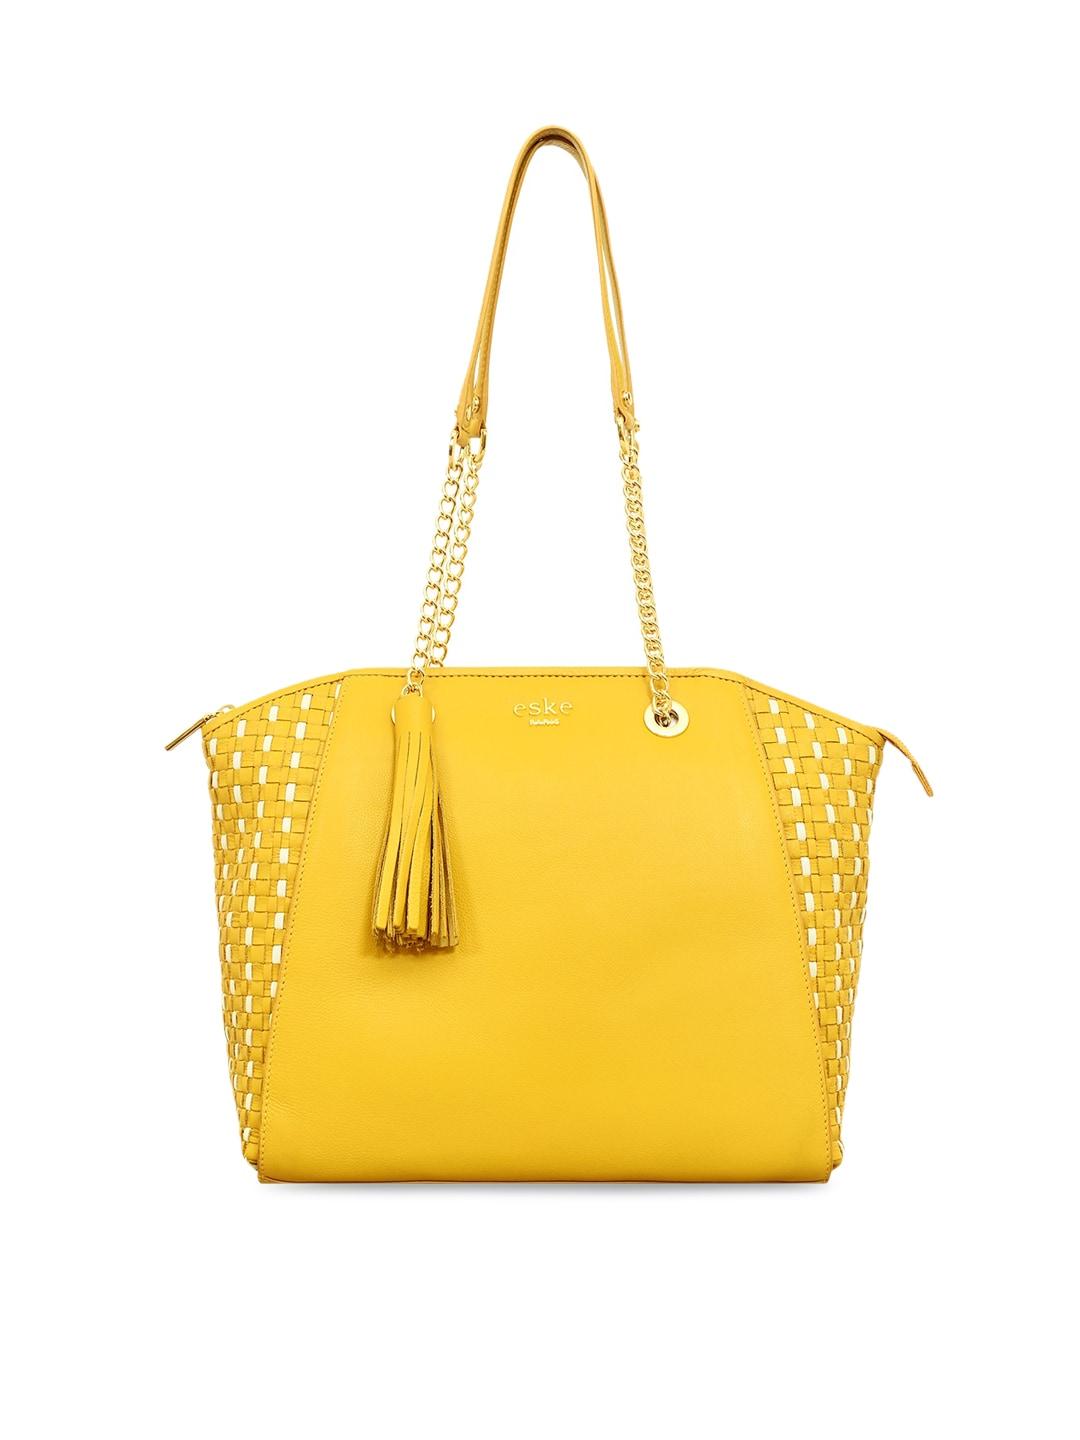 eske yellow leather structured shoulder bag with tasselled